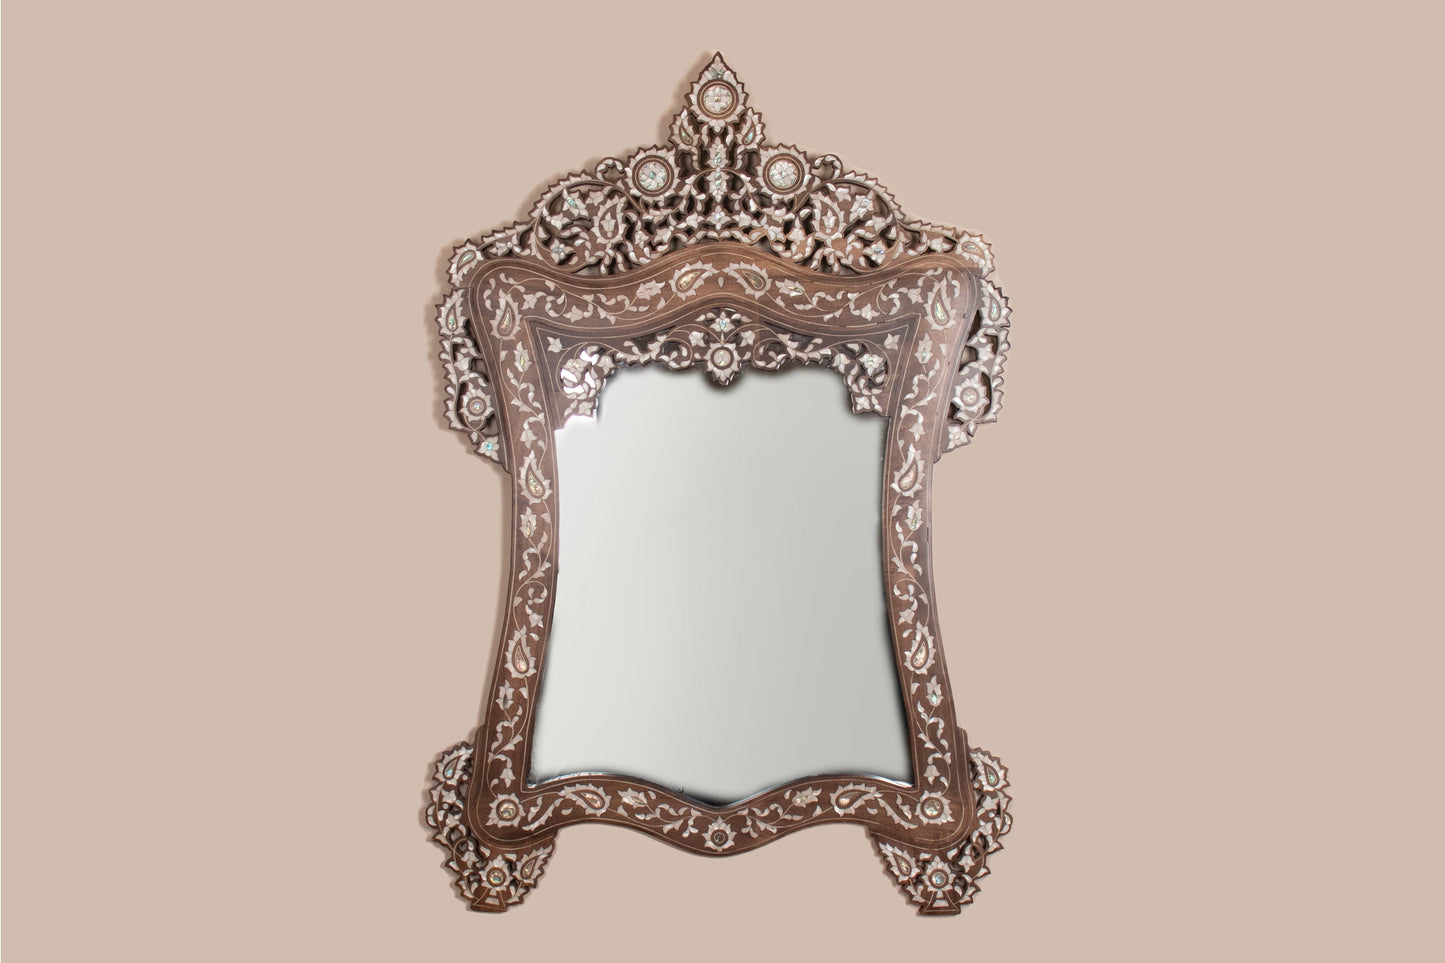 Dresser & Mirror Set - Inlayed in Mother of Pearl